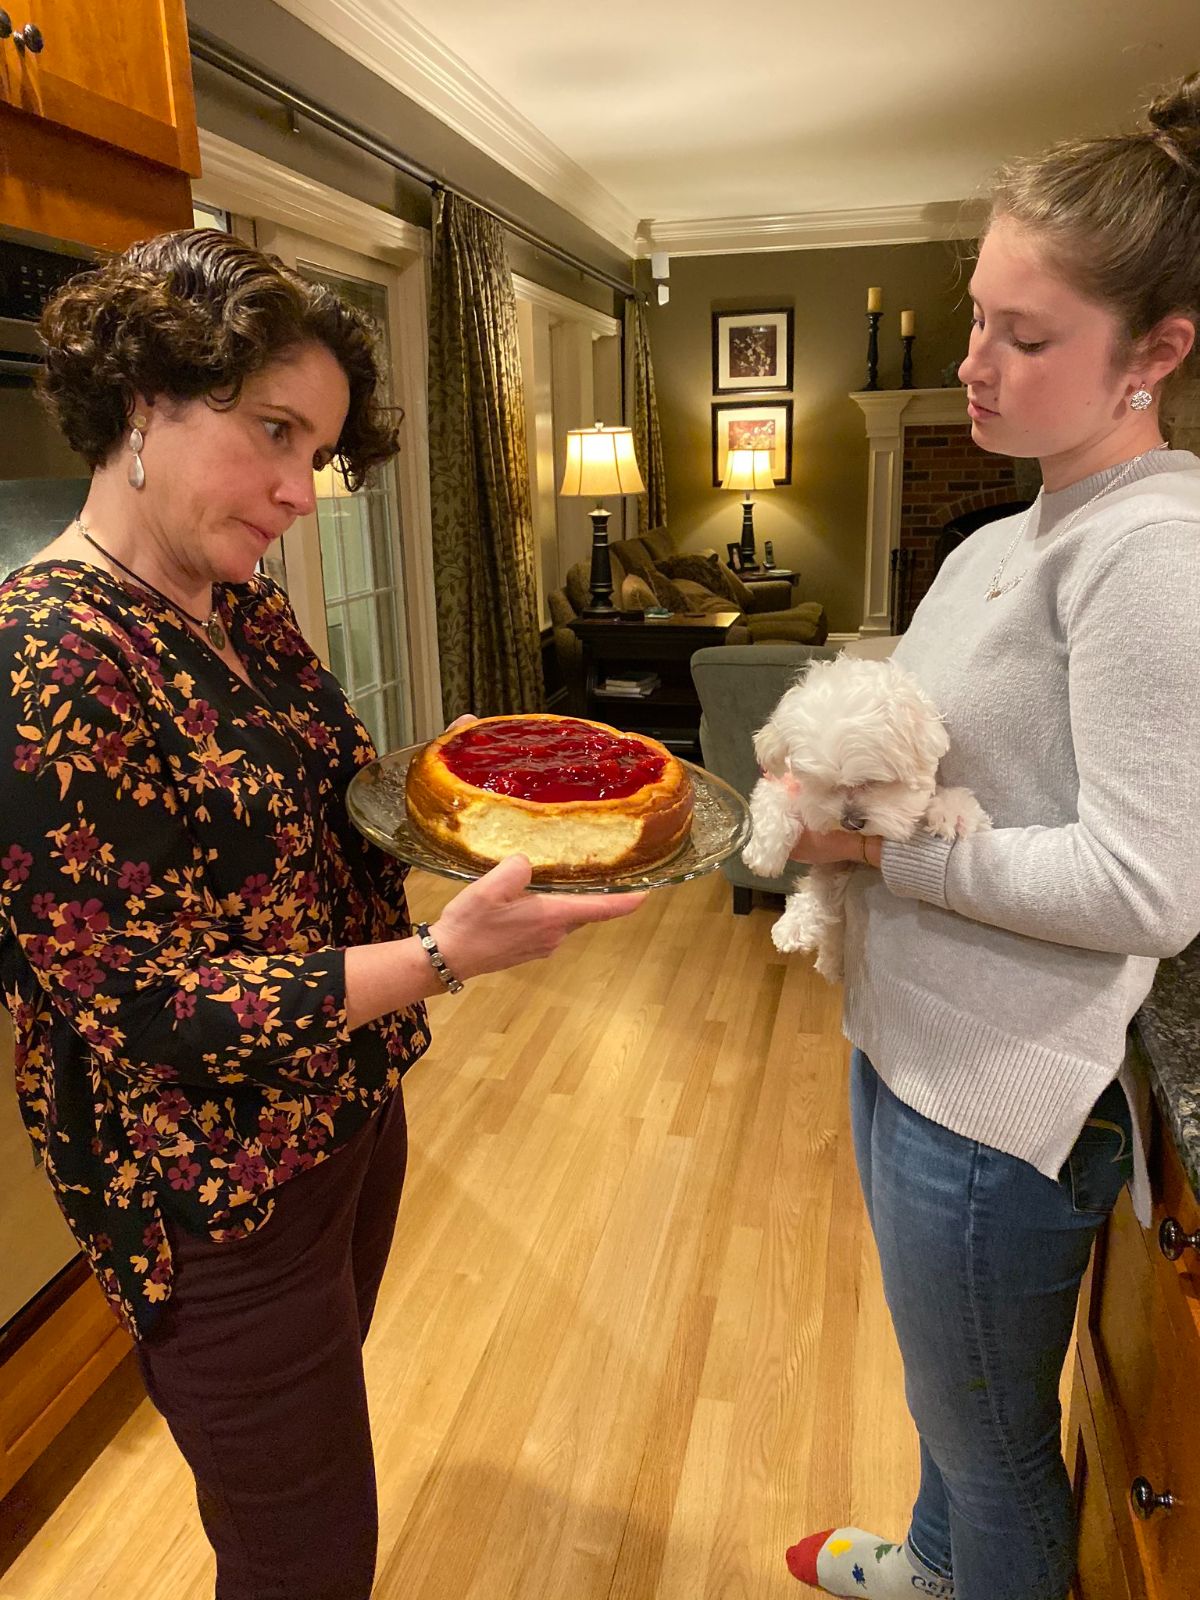 1 woman holding a small fluffy dog and another woman holding a cheesecake with one side eaten